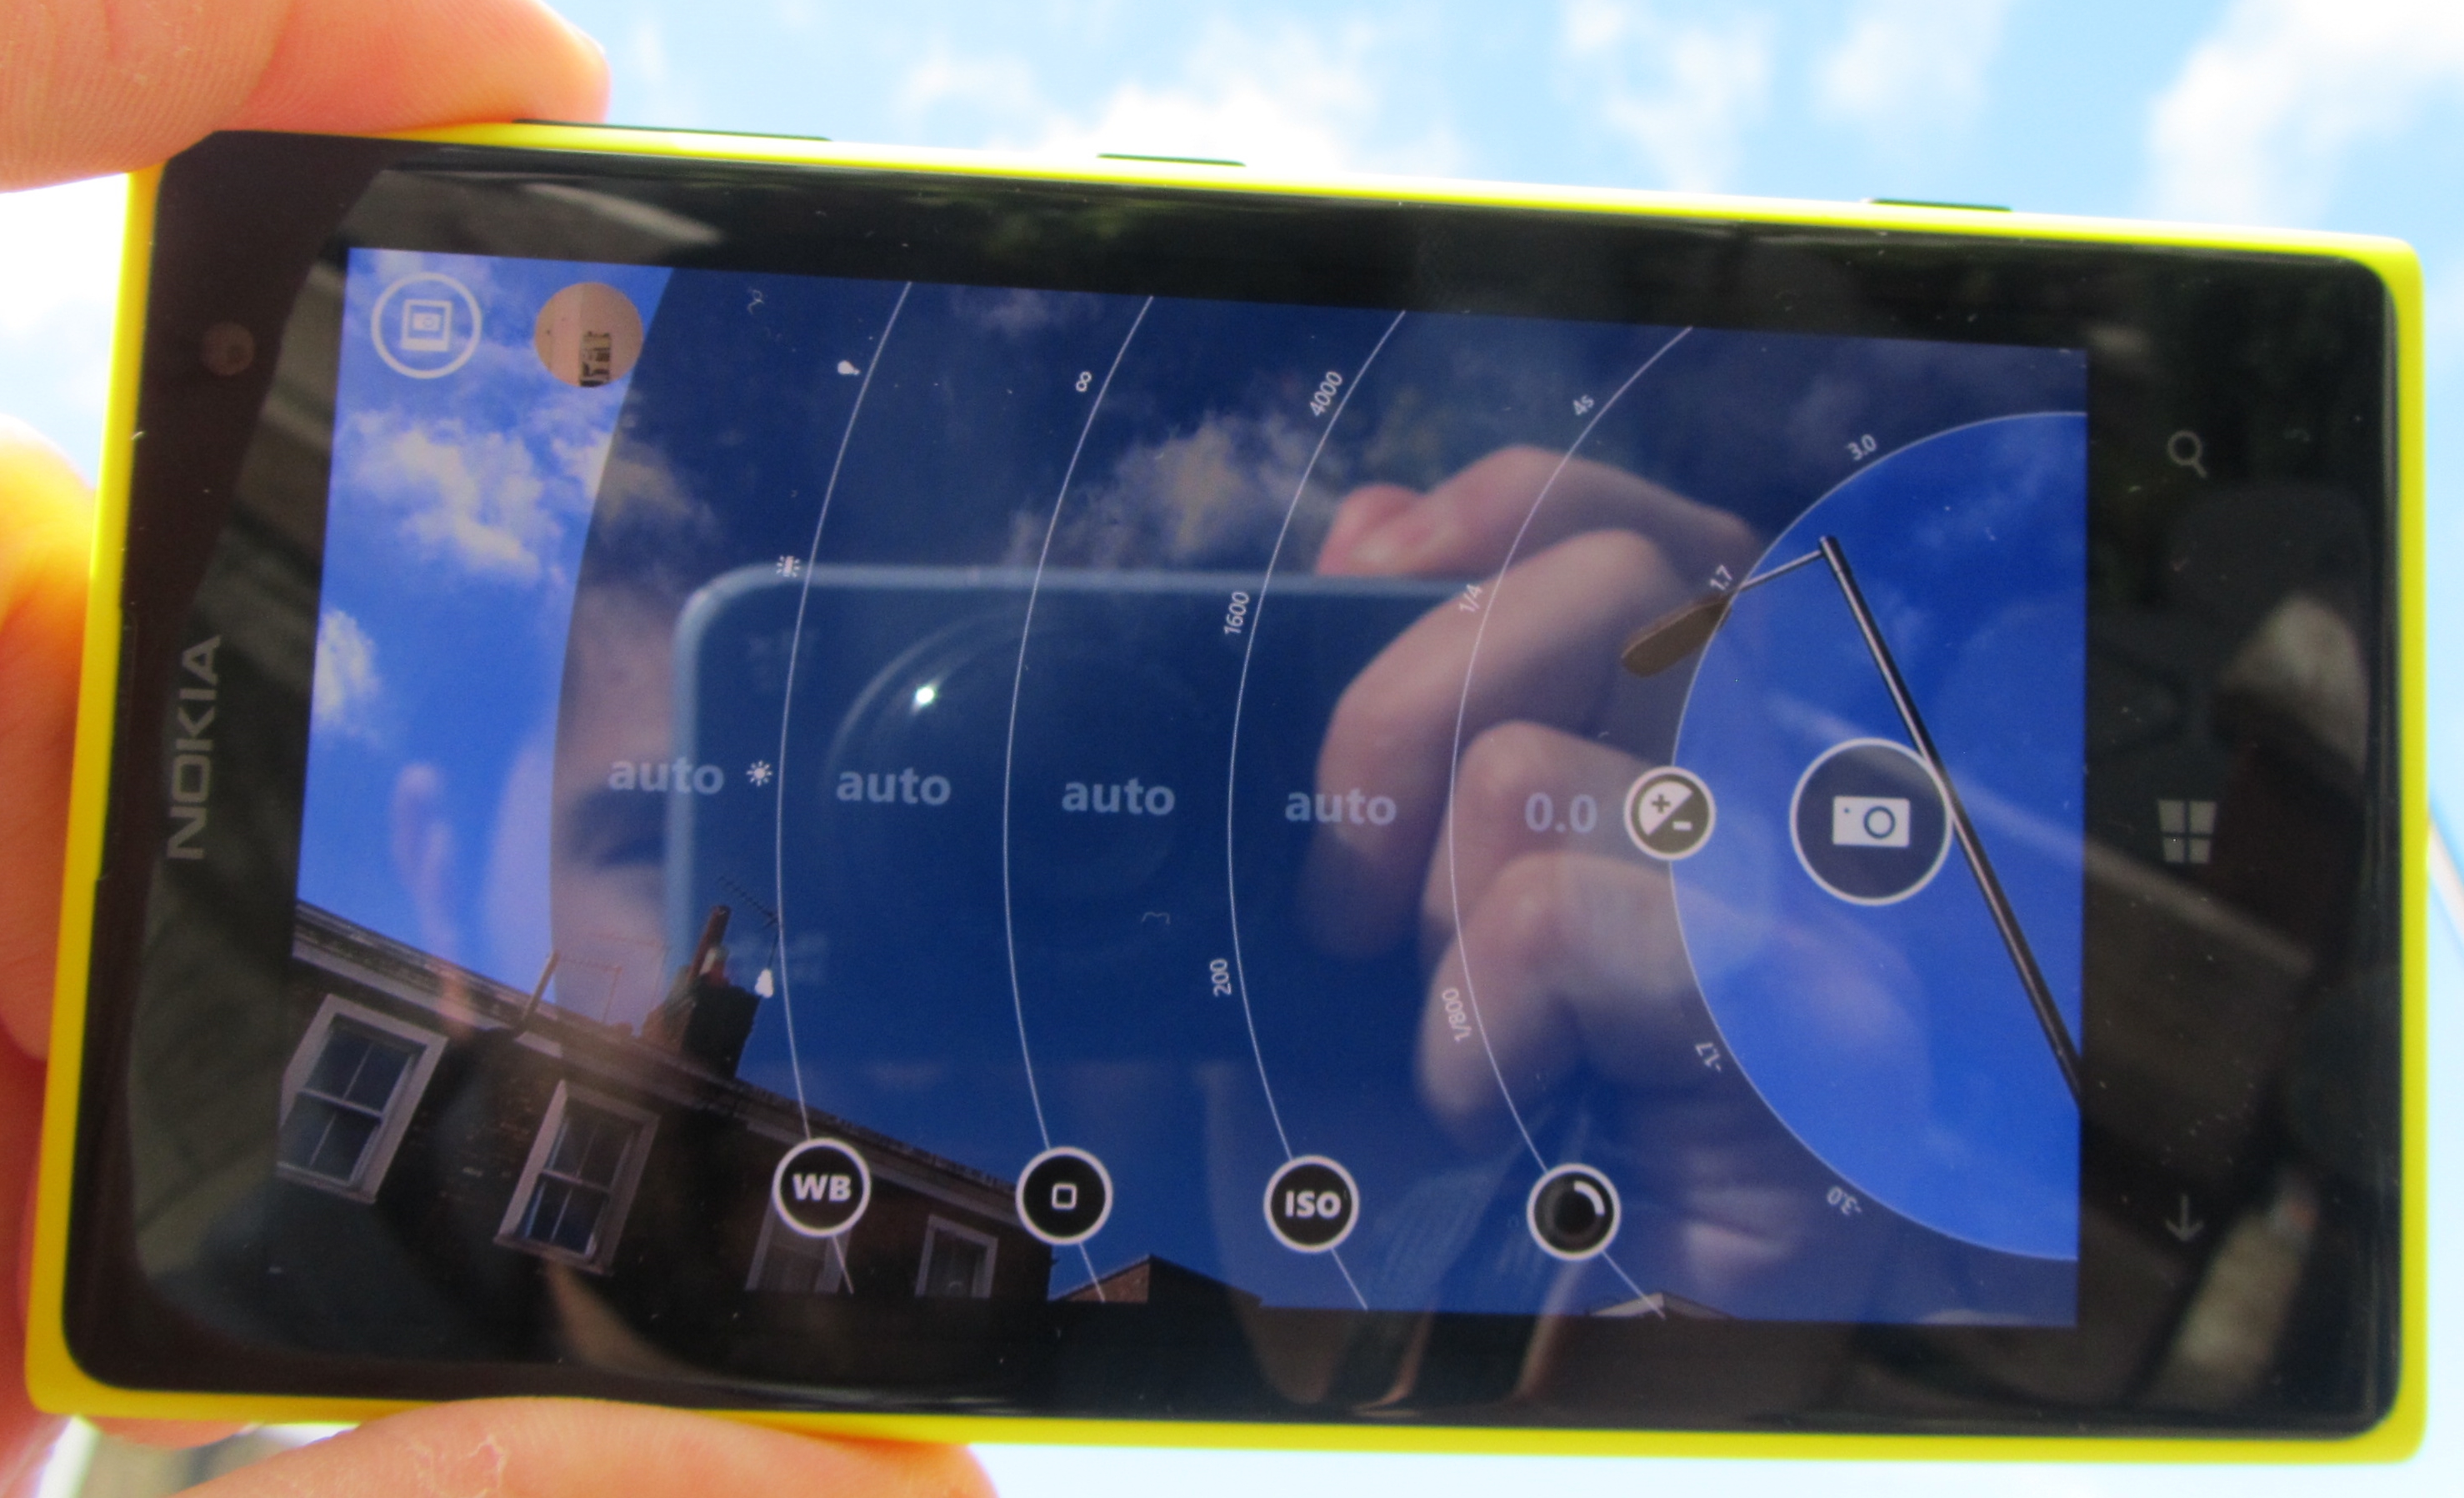 1020 Pro mode Nokia Lumia 1020 review: The best camera phone, but not the best smartphone